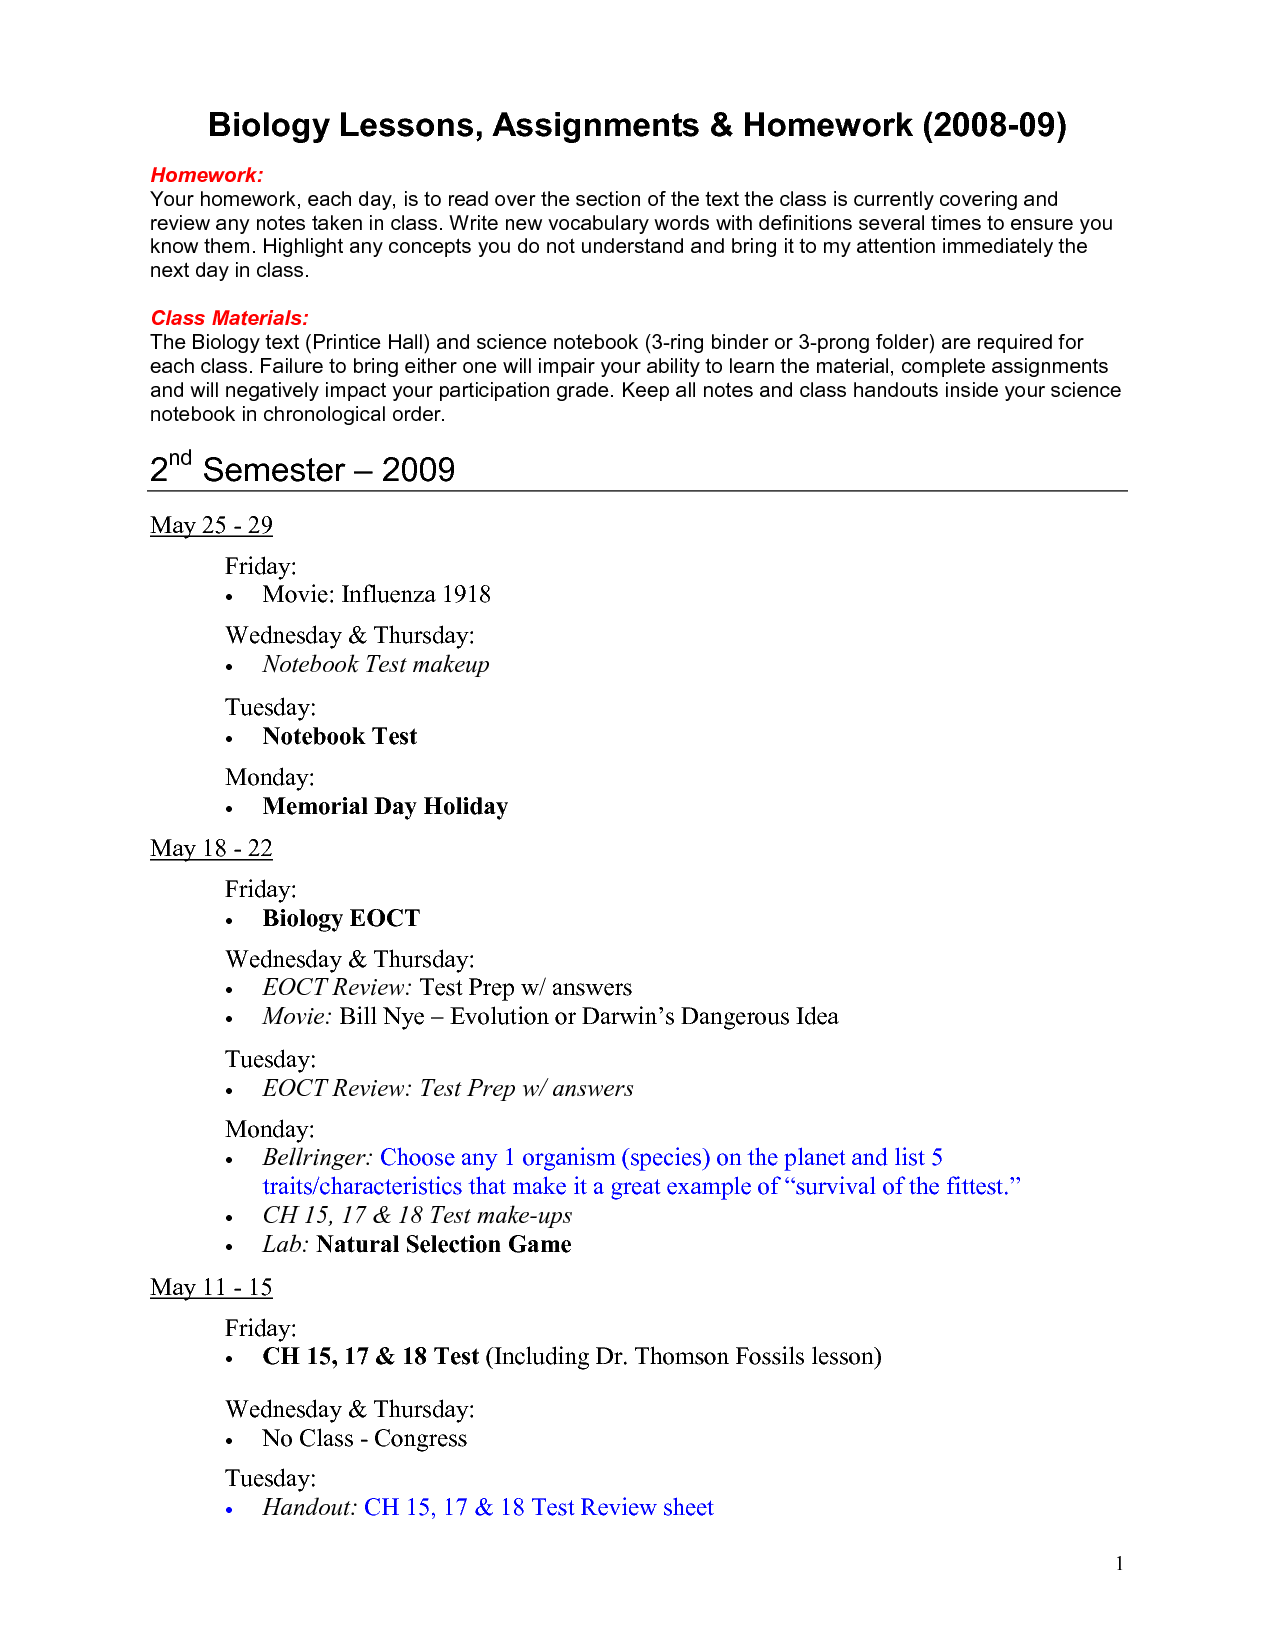 15-best-images-of-finding-nemo-worksheets-with-answer-key-finding-nemo-worksheet-answers